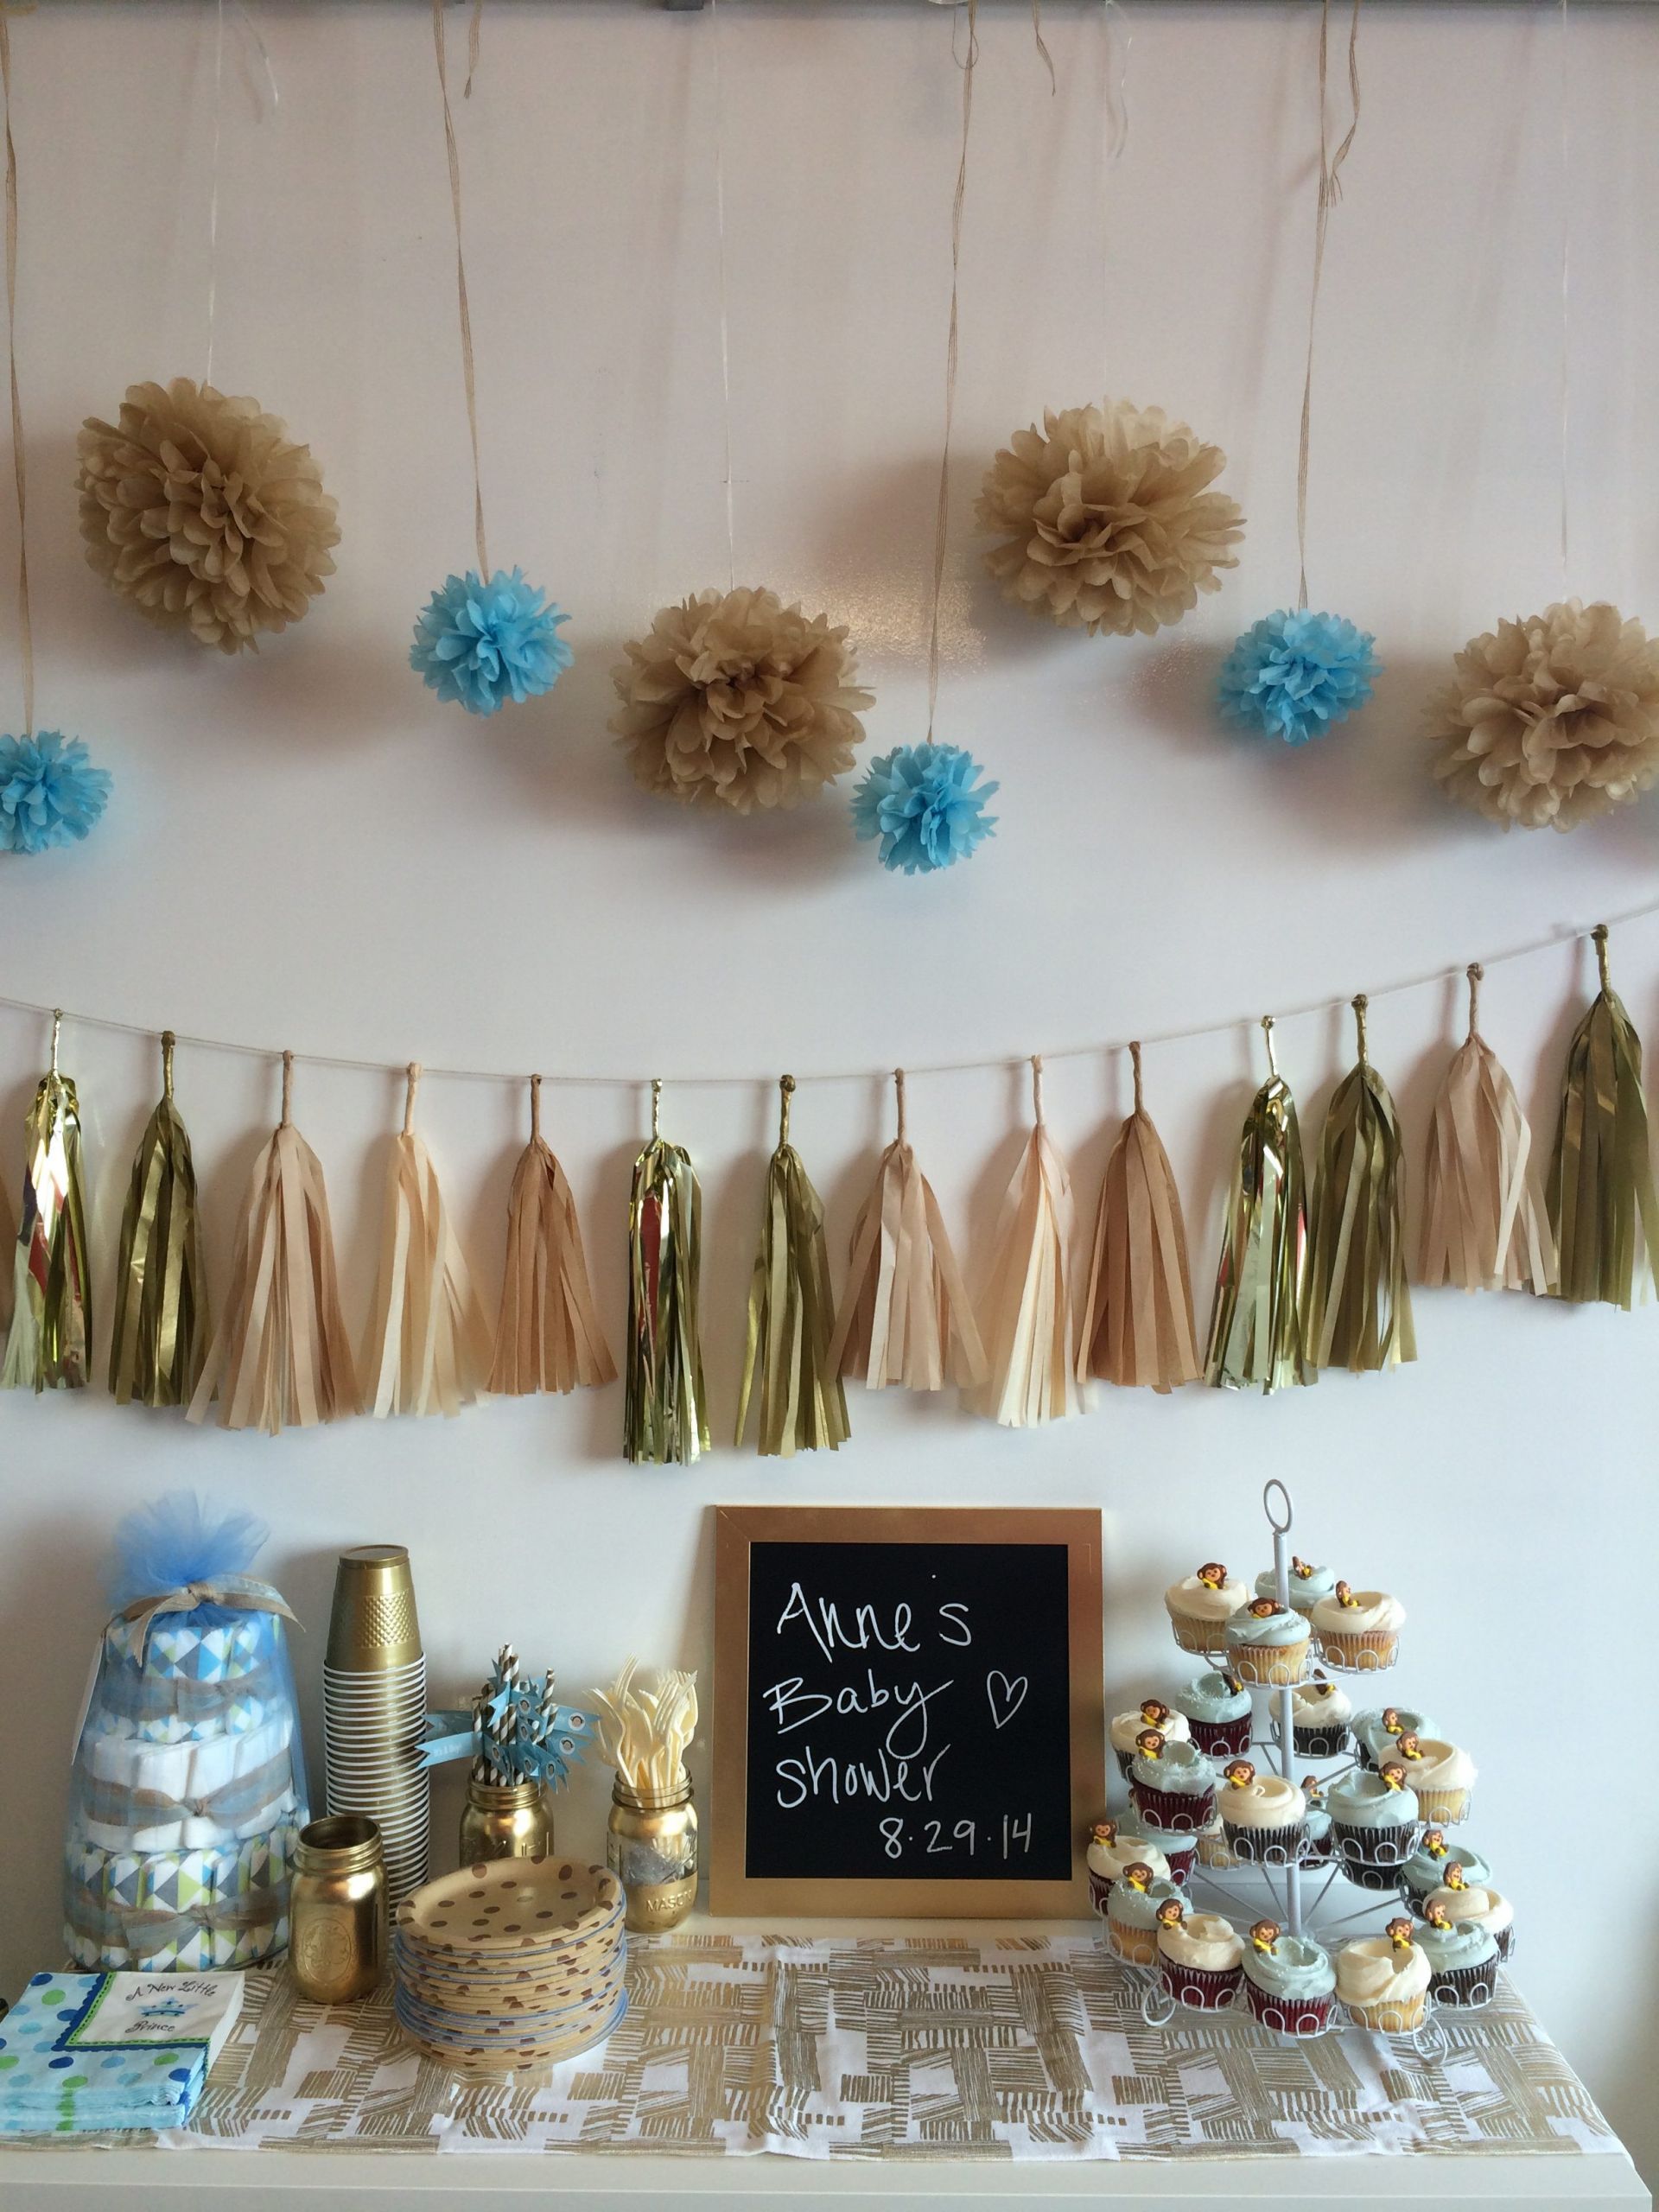 DIY Baby Shower Decorations For Boys
 DIY How to Throw an fice Baby Shower for a Co Worker